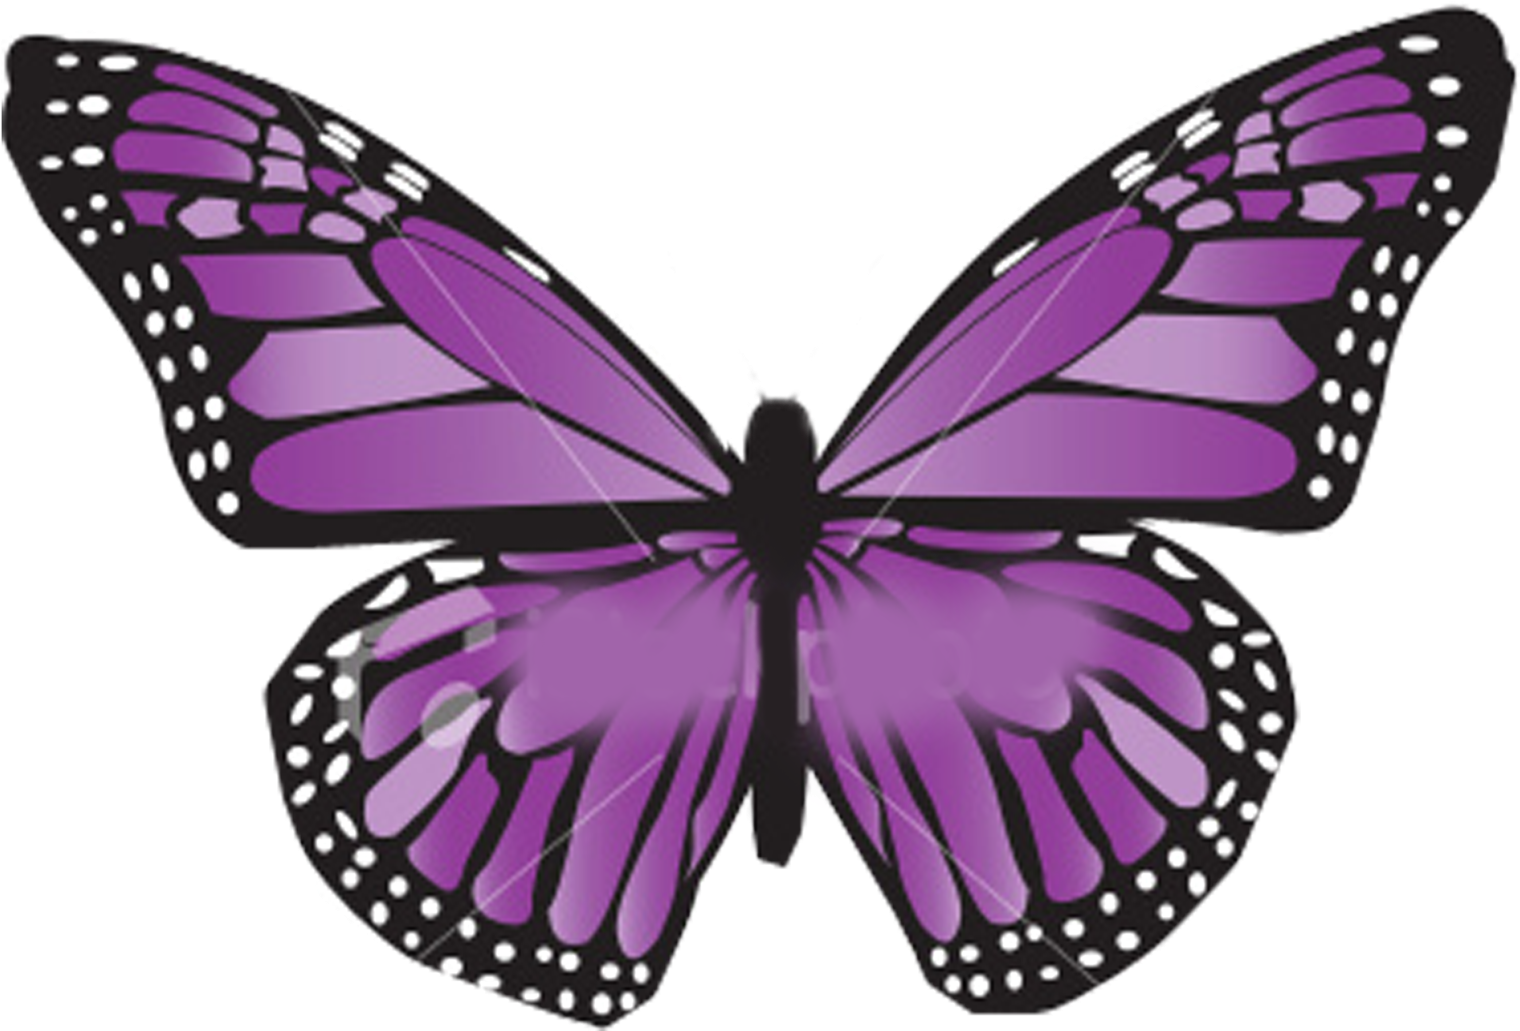 Vibrant Purple Butterfly Illustration PNG image